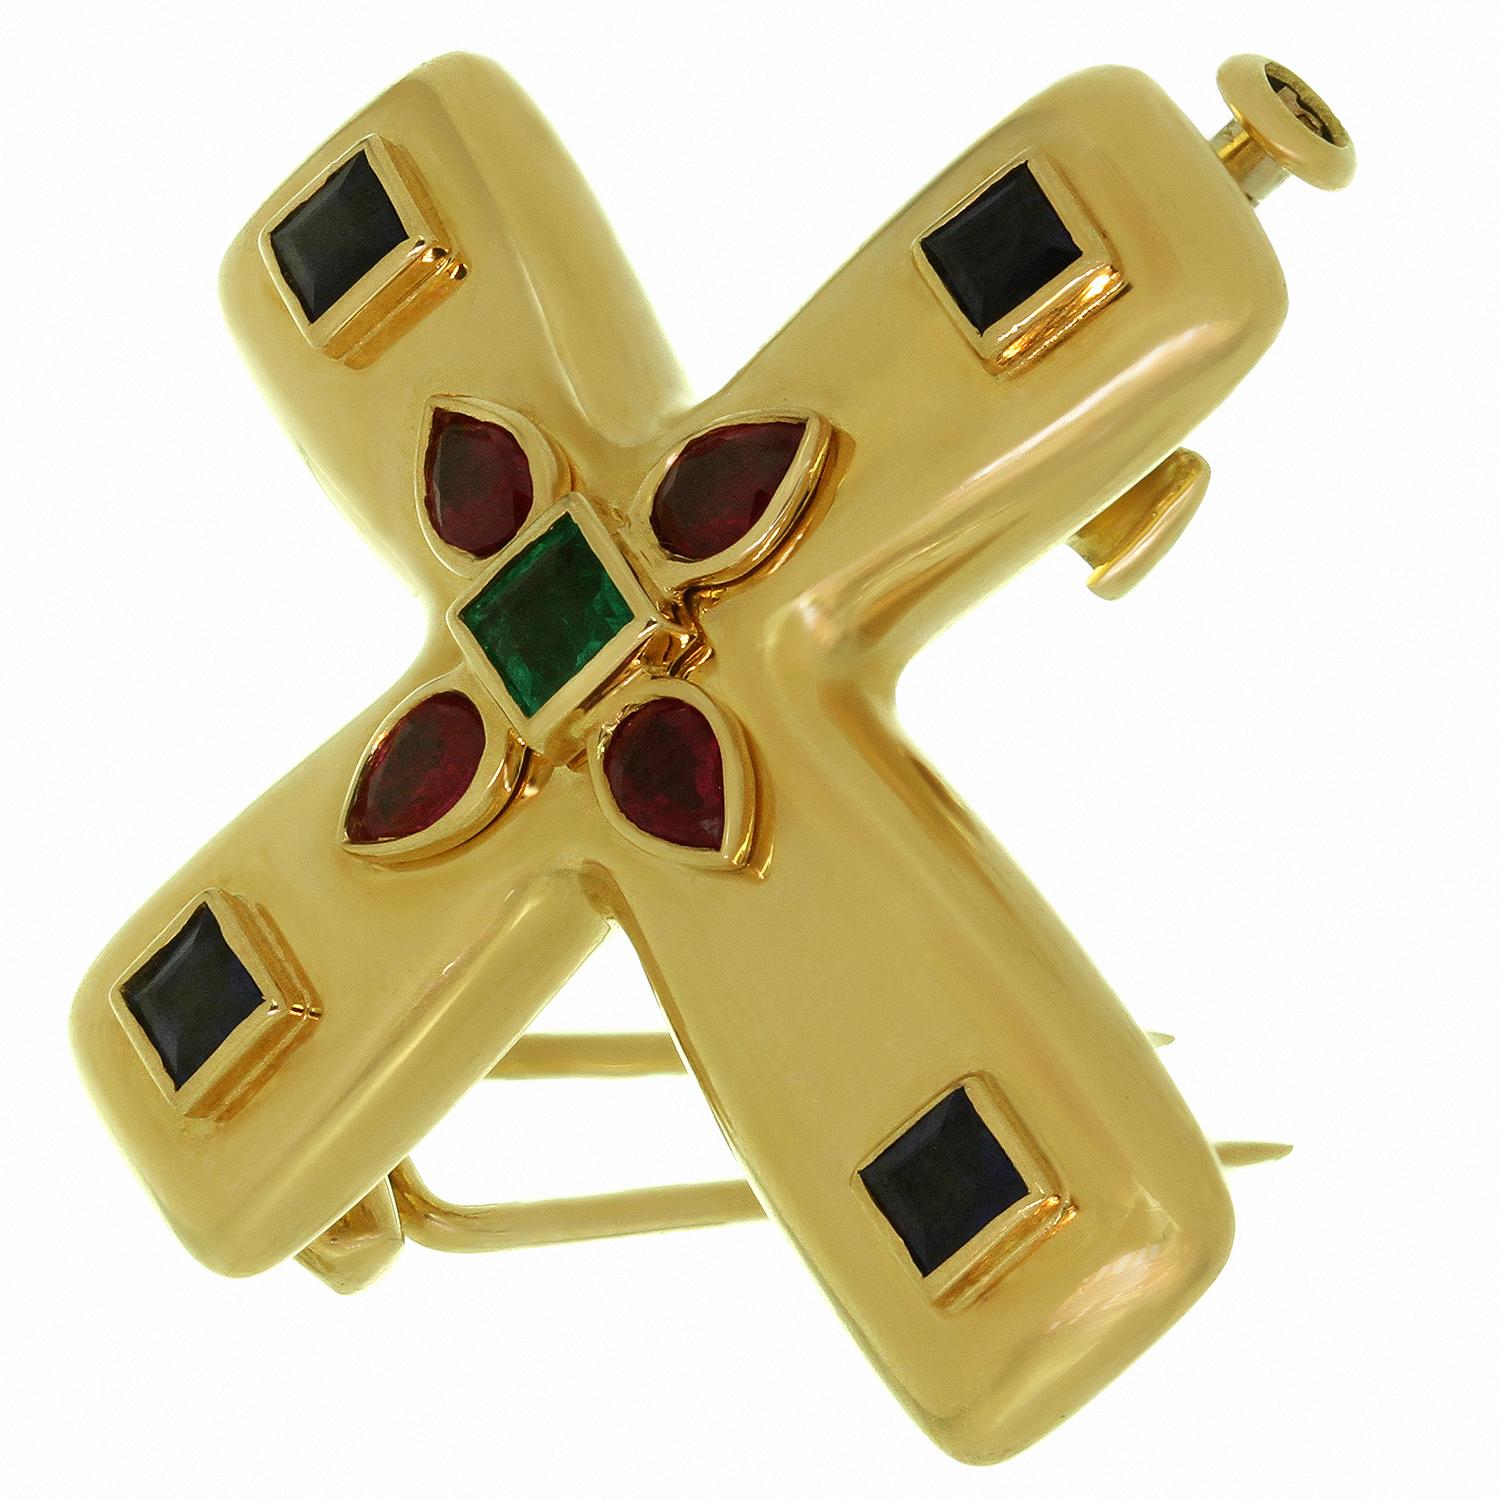 This iconic Cartier medium cross pendant brooch is crafted in 18k yellow gold and set with faceted rubies, sapphires, and emerald.  The Byzantine motif was designed by Louis Cartier during his trip to Russia in the early part of the 20th century,